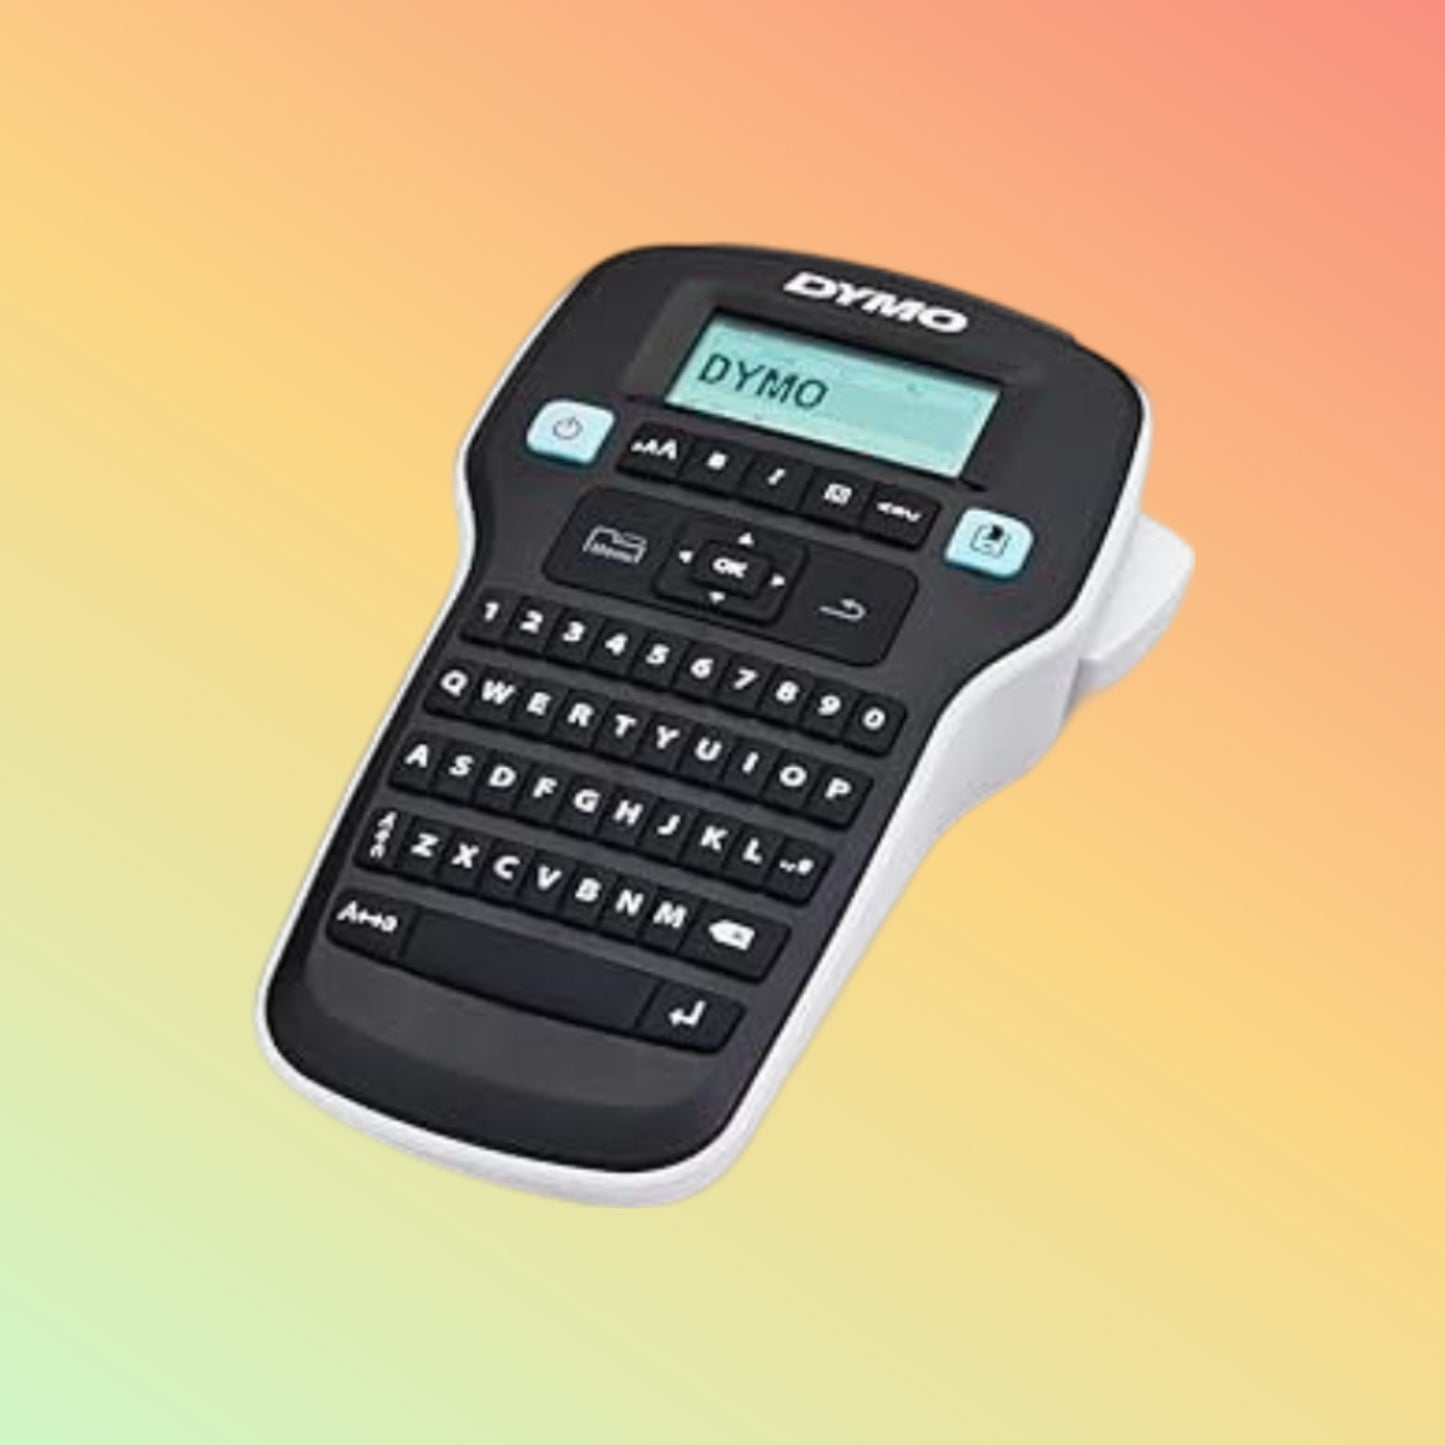 DYMO LabelManager 160 Portable Label Maker – Compact Labeling Solution